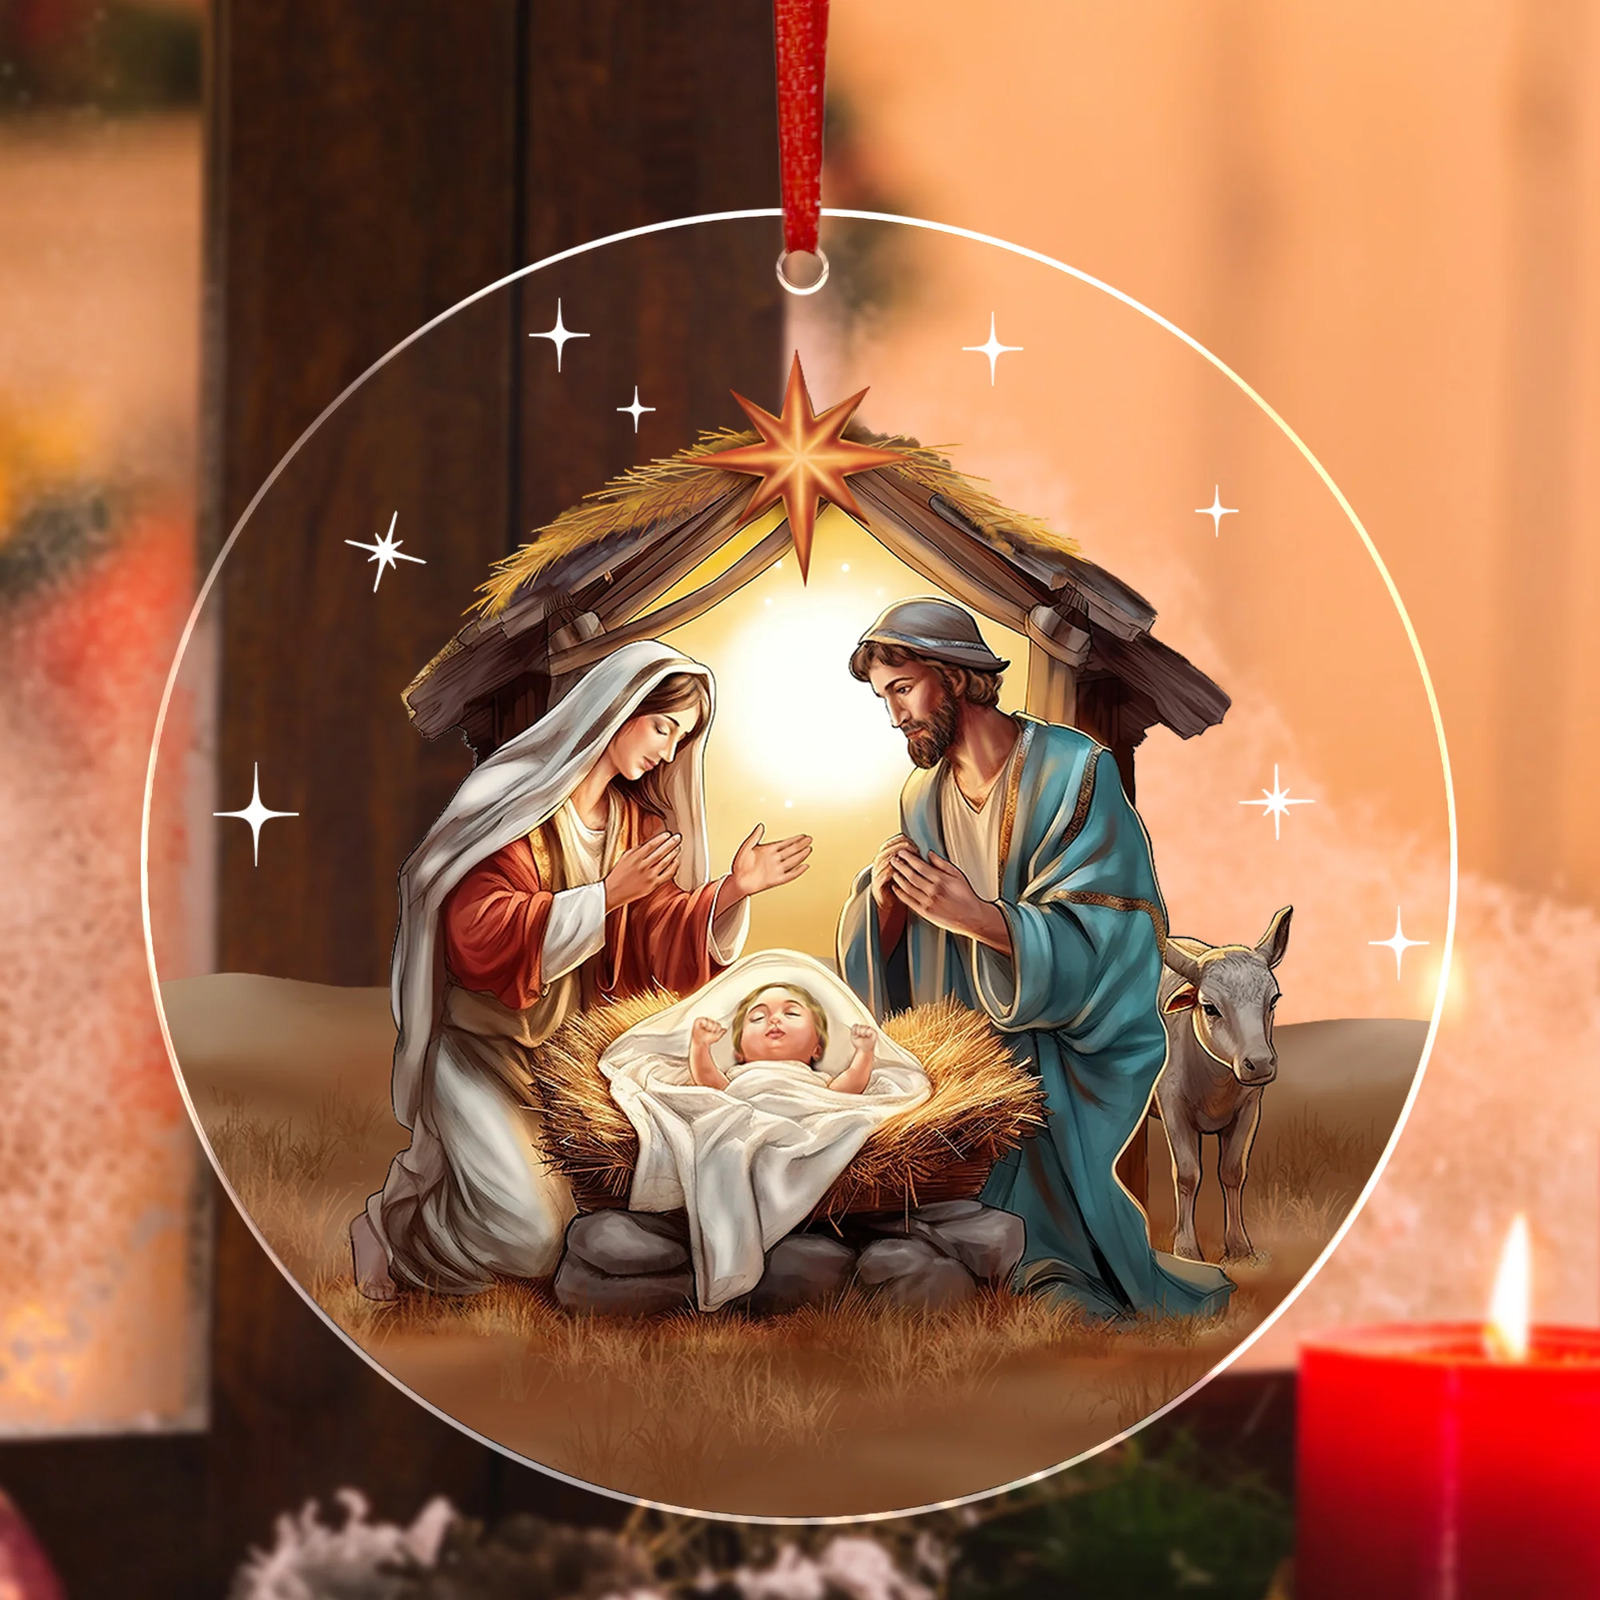 Christian Catholic Gifts for Women Faith, Christmas Ornaments - Religious Gifts